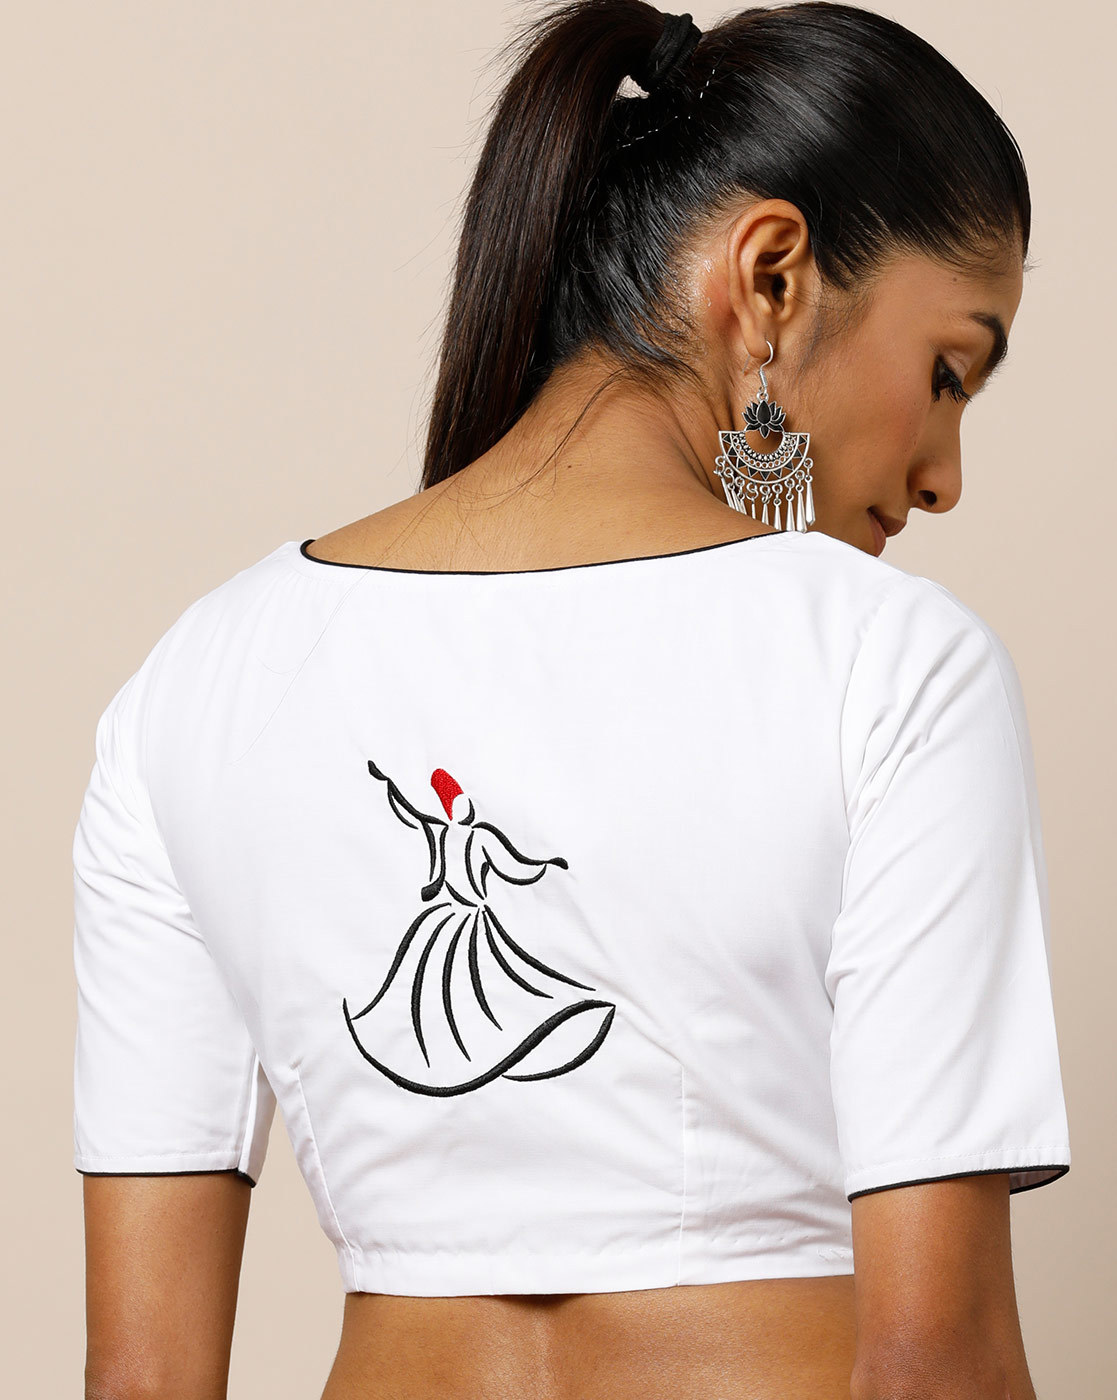 blouse-back-with-embroidery-designs-2019 (17)